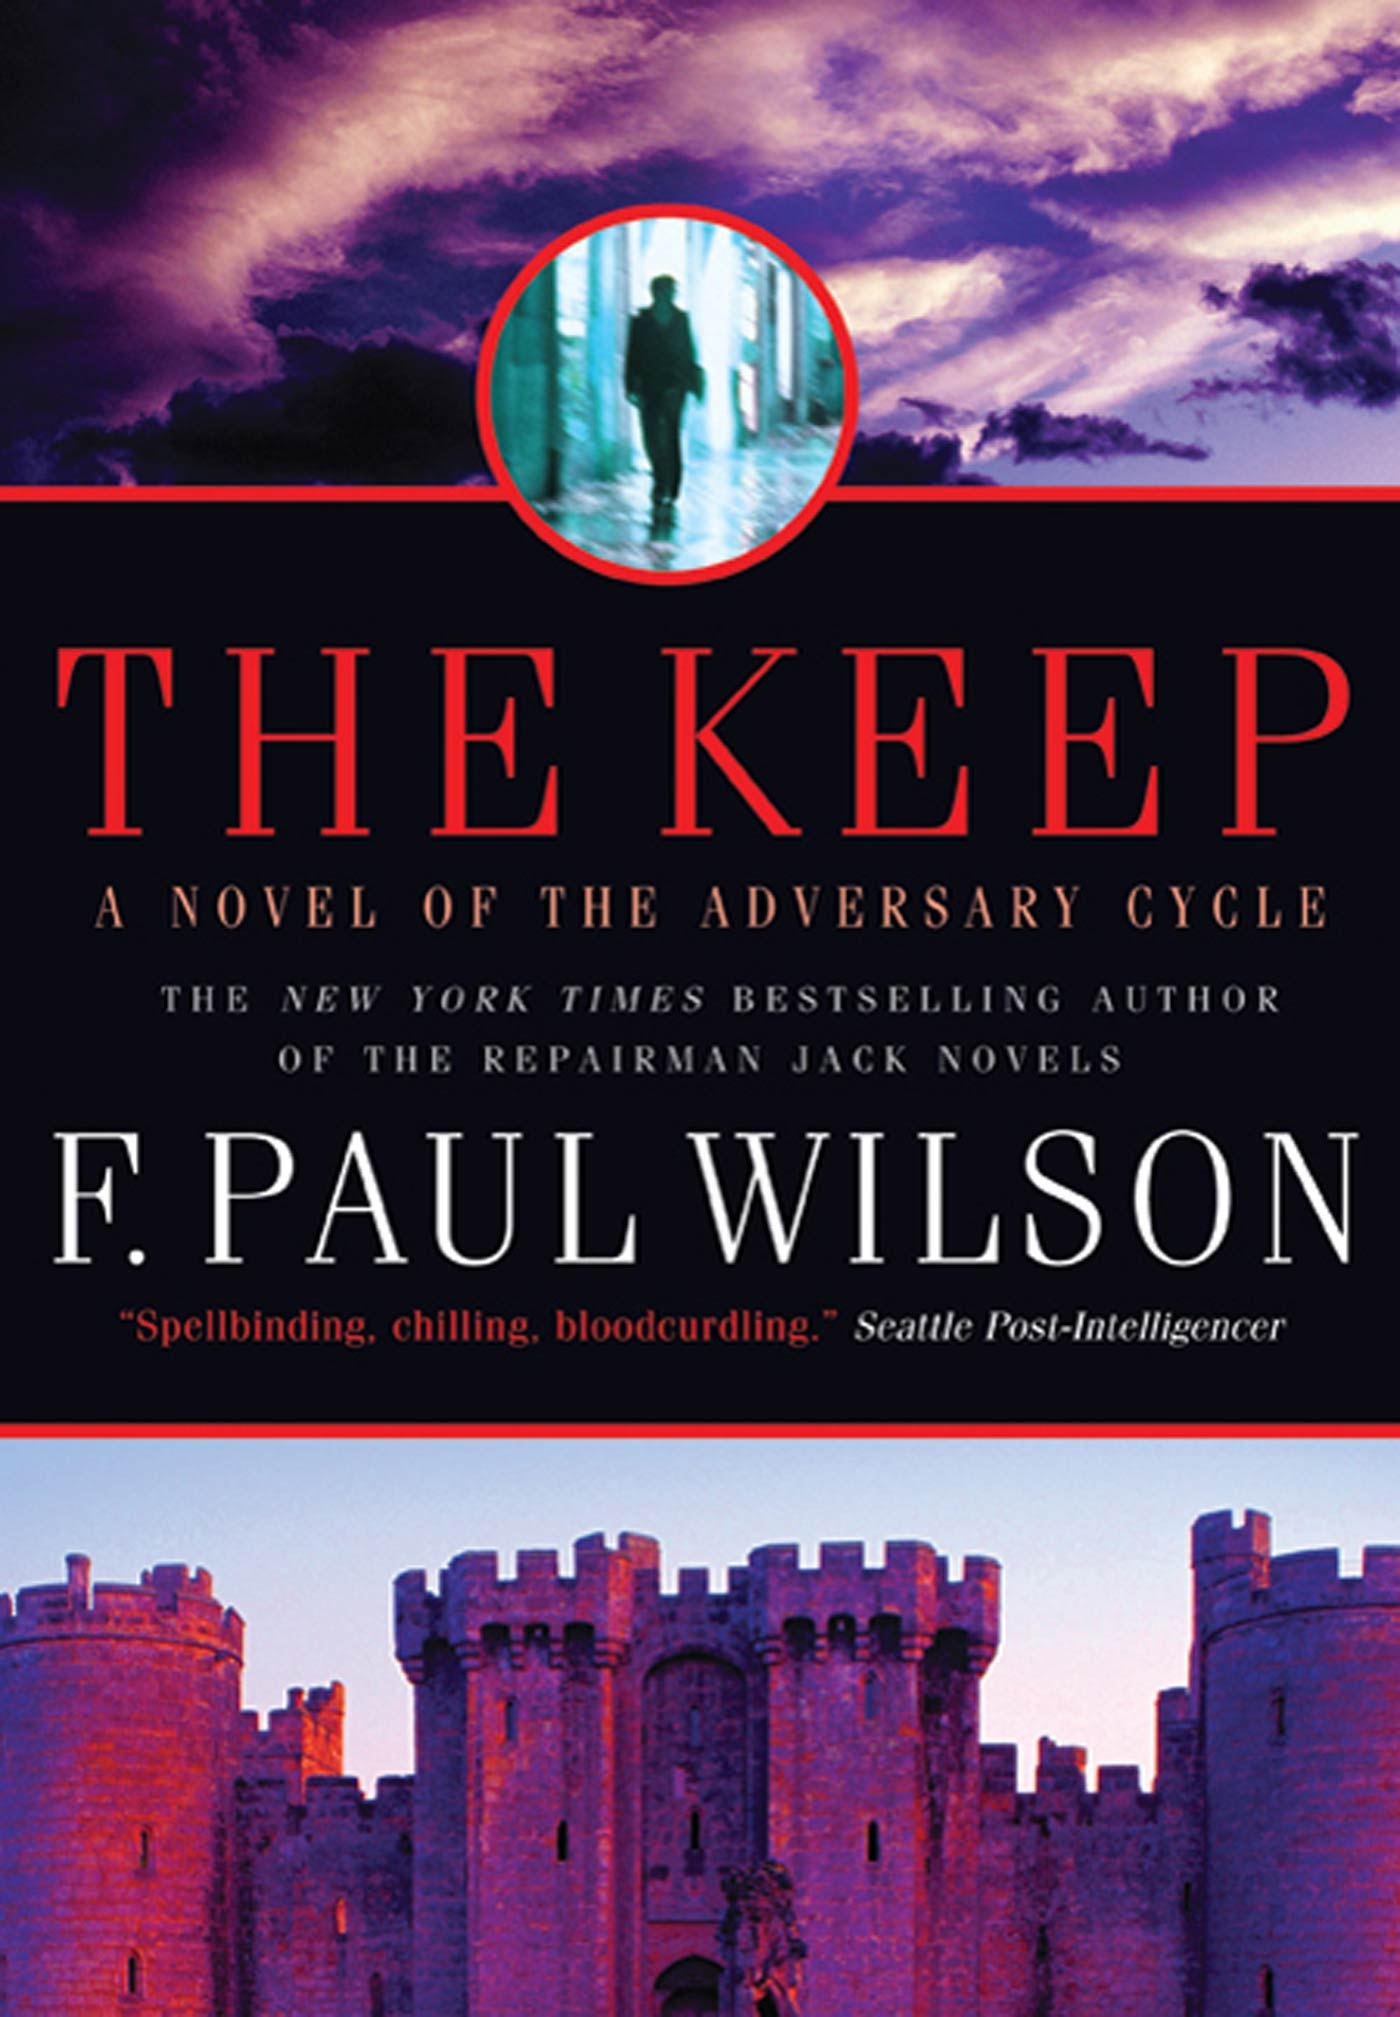 The Keep : A Novel of the Adversary Cycle by F. Paul Wilson